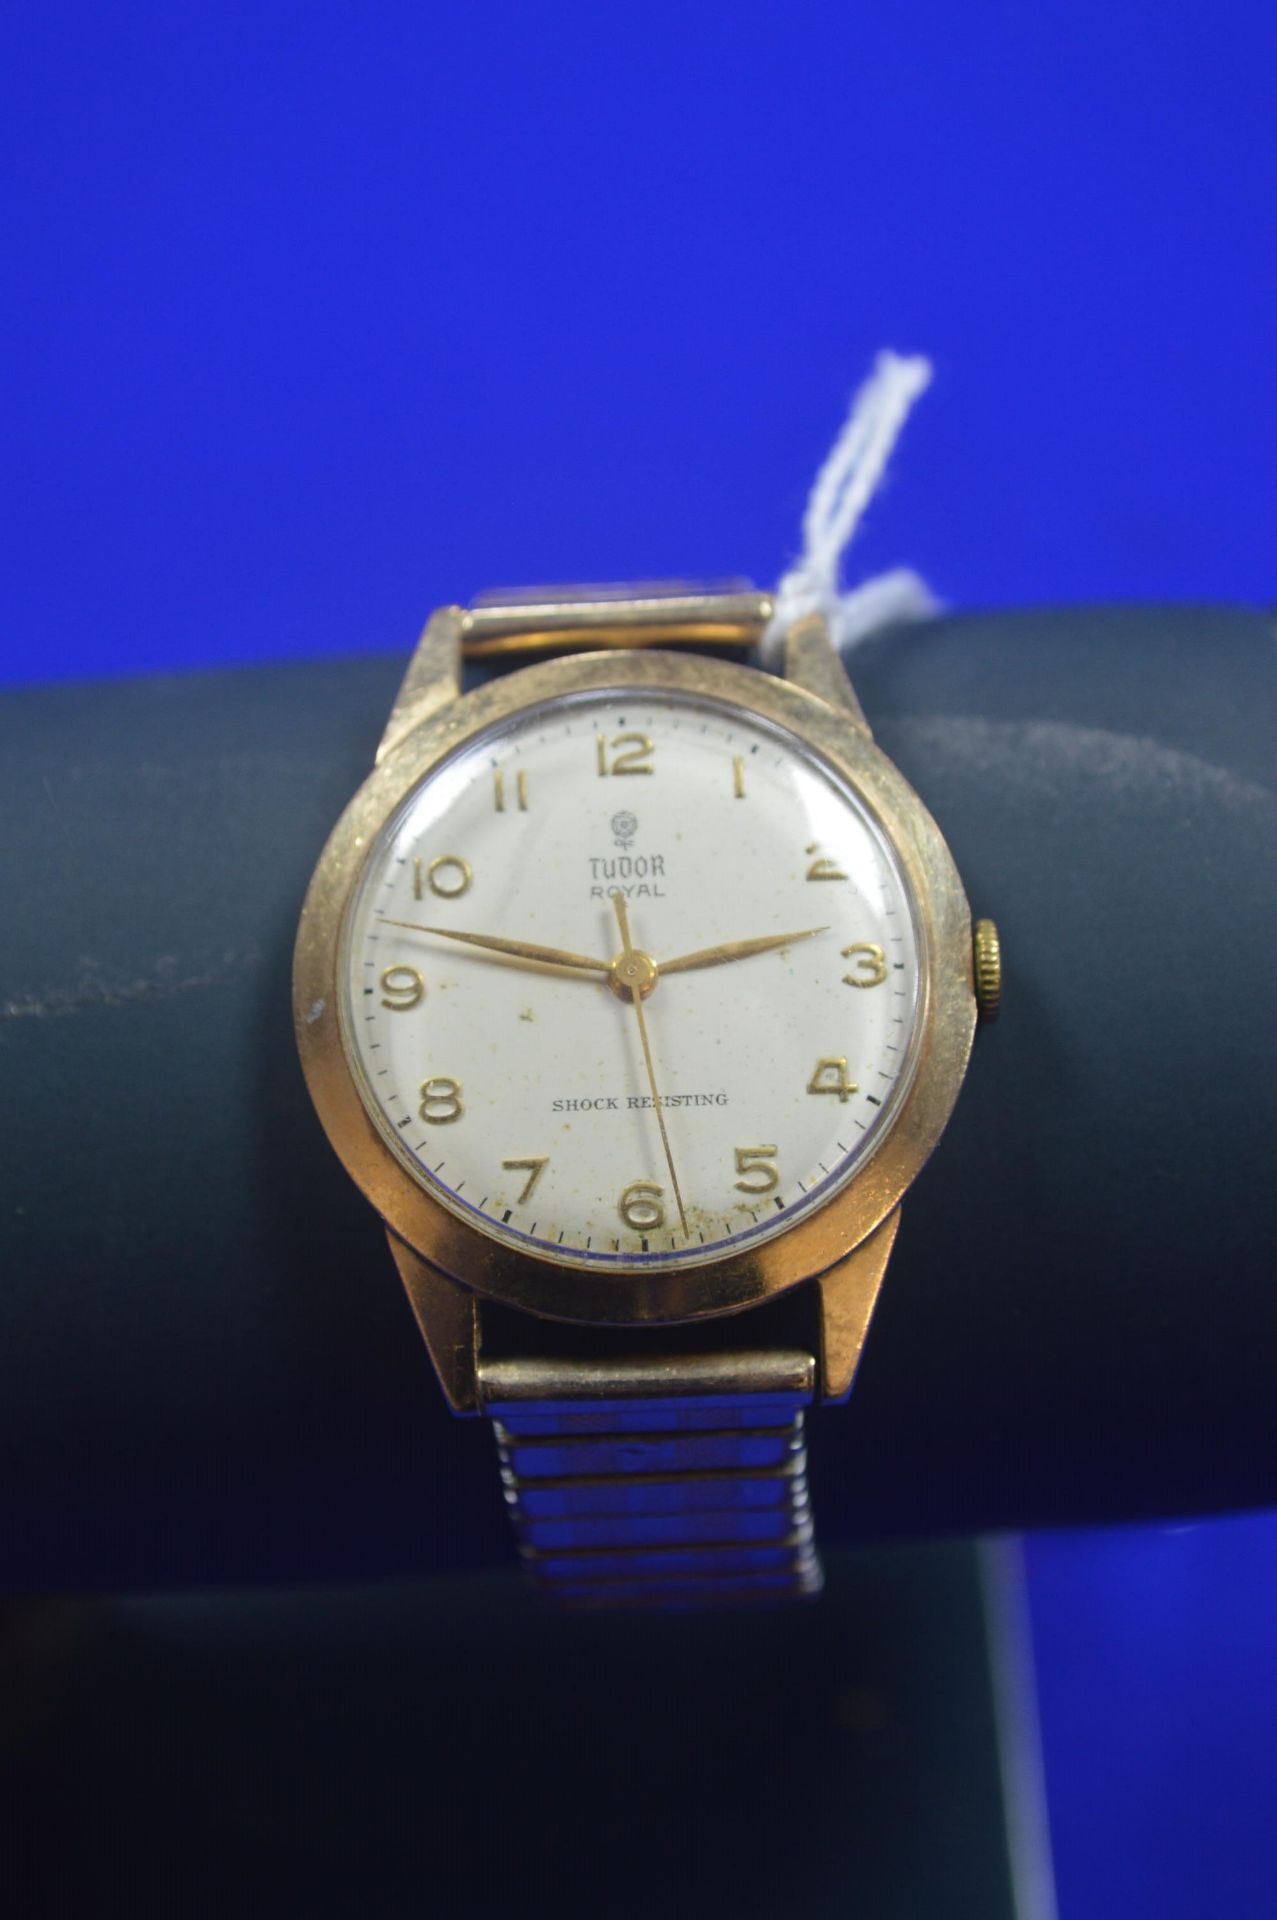 Tudor Royal Manual Wristwatch (in working condition) - Image 2 of 3